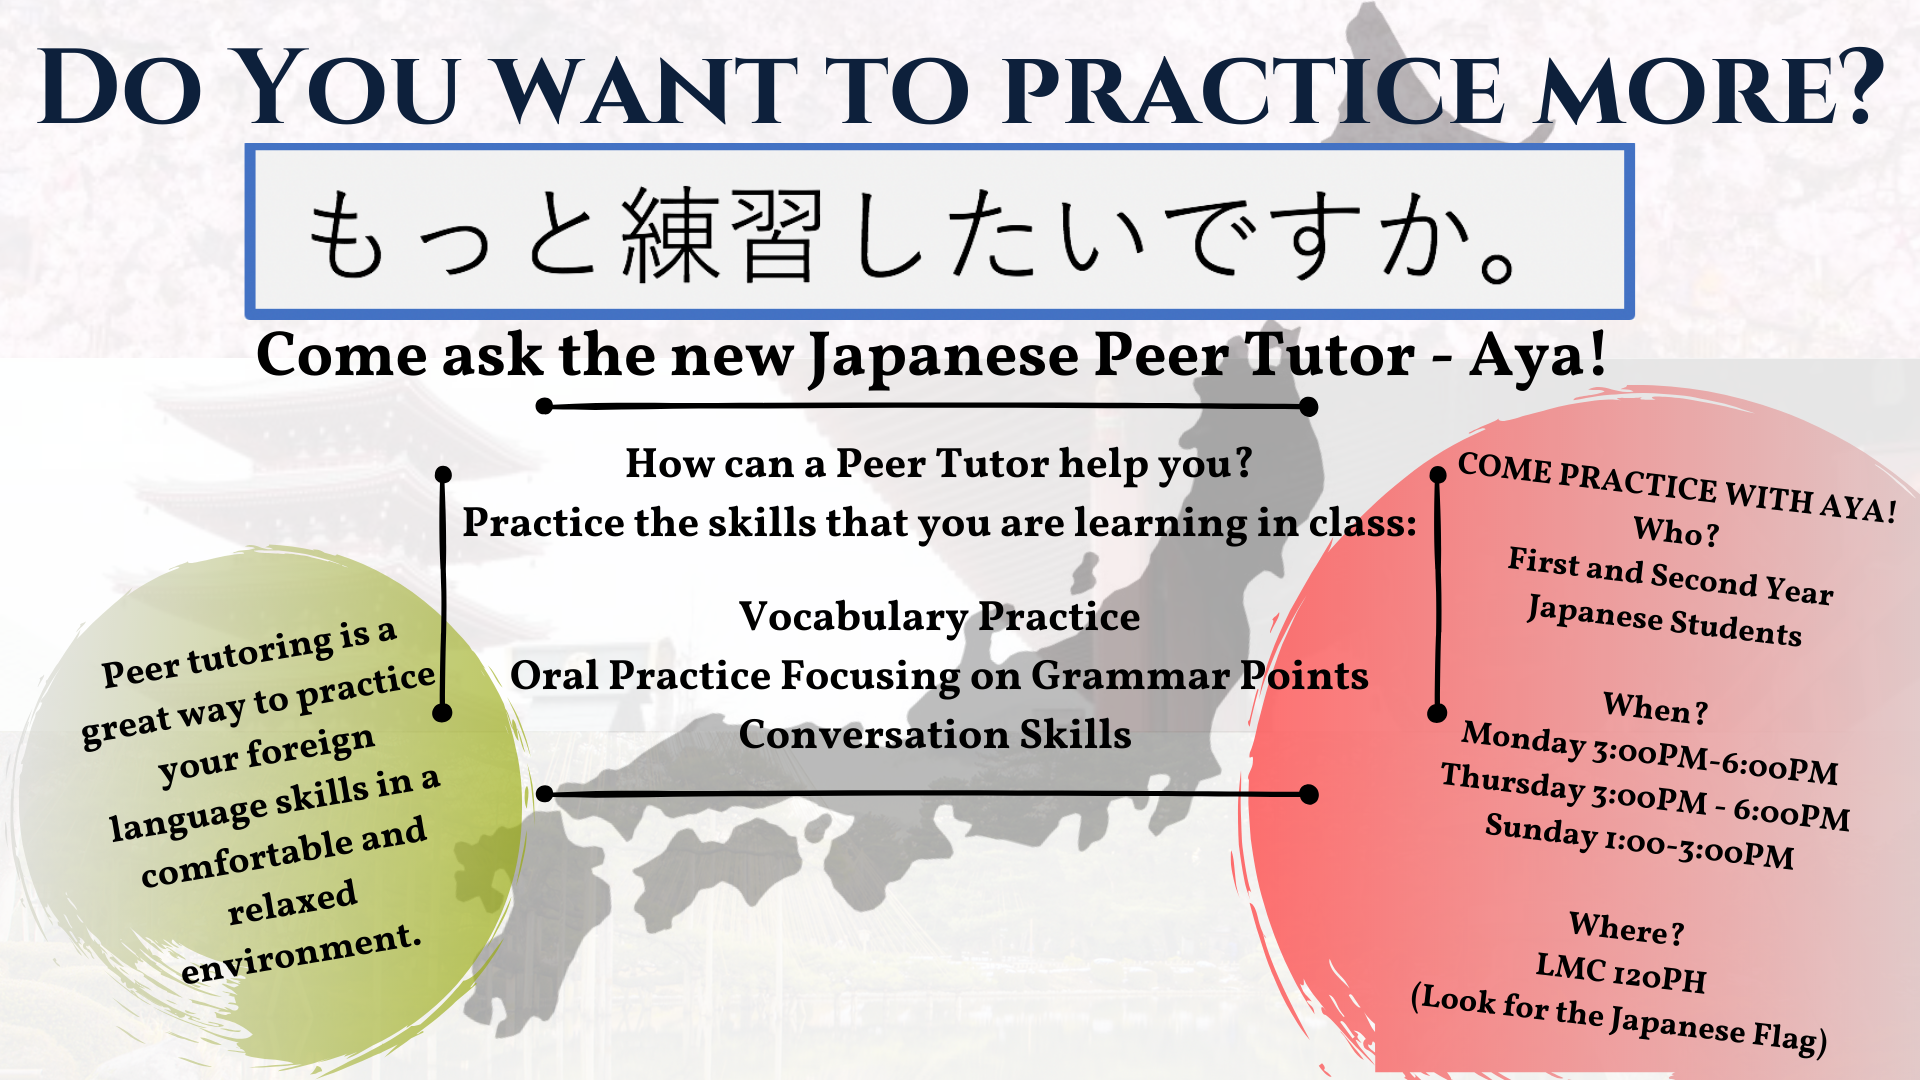 Do you want to practice more? Come ask the new Japanese Peer Tutor - Aya! How can a peer tutor help you? Practice the skills that you are learning in class: Vocabulary practice, oral practice focusing on grammar points, conversation skills. Peer tutoring is a great way to practice your foreign language skills in a comfortable and relaxed environment. Come practice with Aya! who? first and second year Japanese students. When? Monday, 3:00PM-6:00PM, Thursday, 3:00PM-6:00PM, Sunday, 1:00PM-3:00PM. Where? LMC 120 PH (Look for the Japanese Flag). 